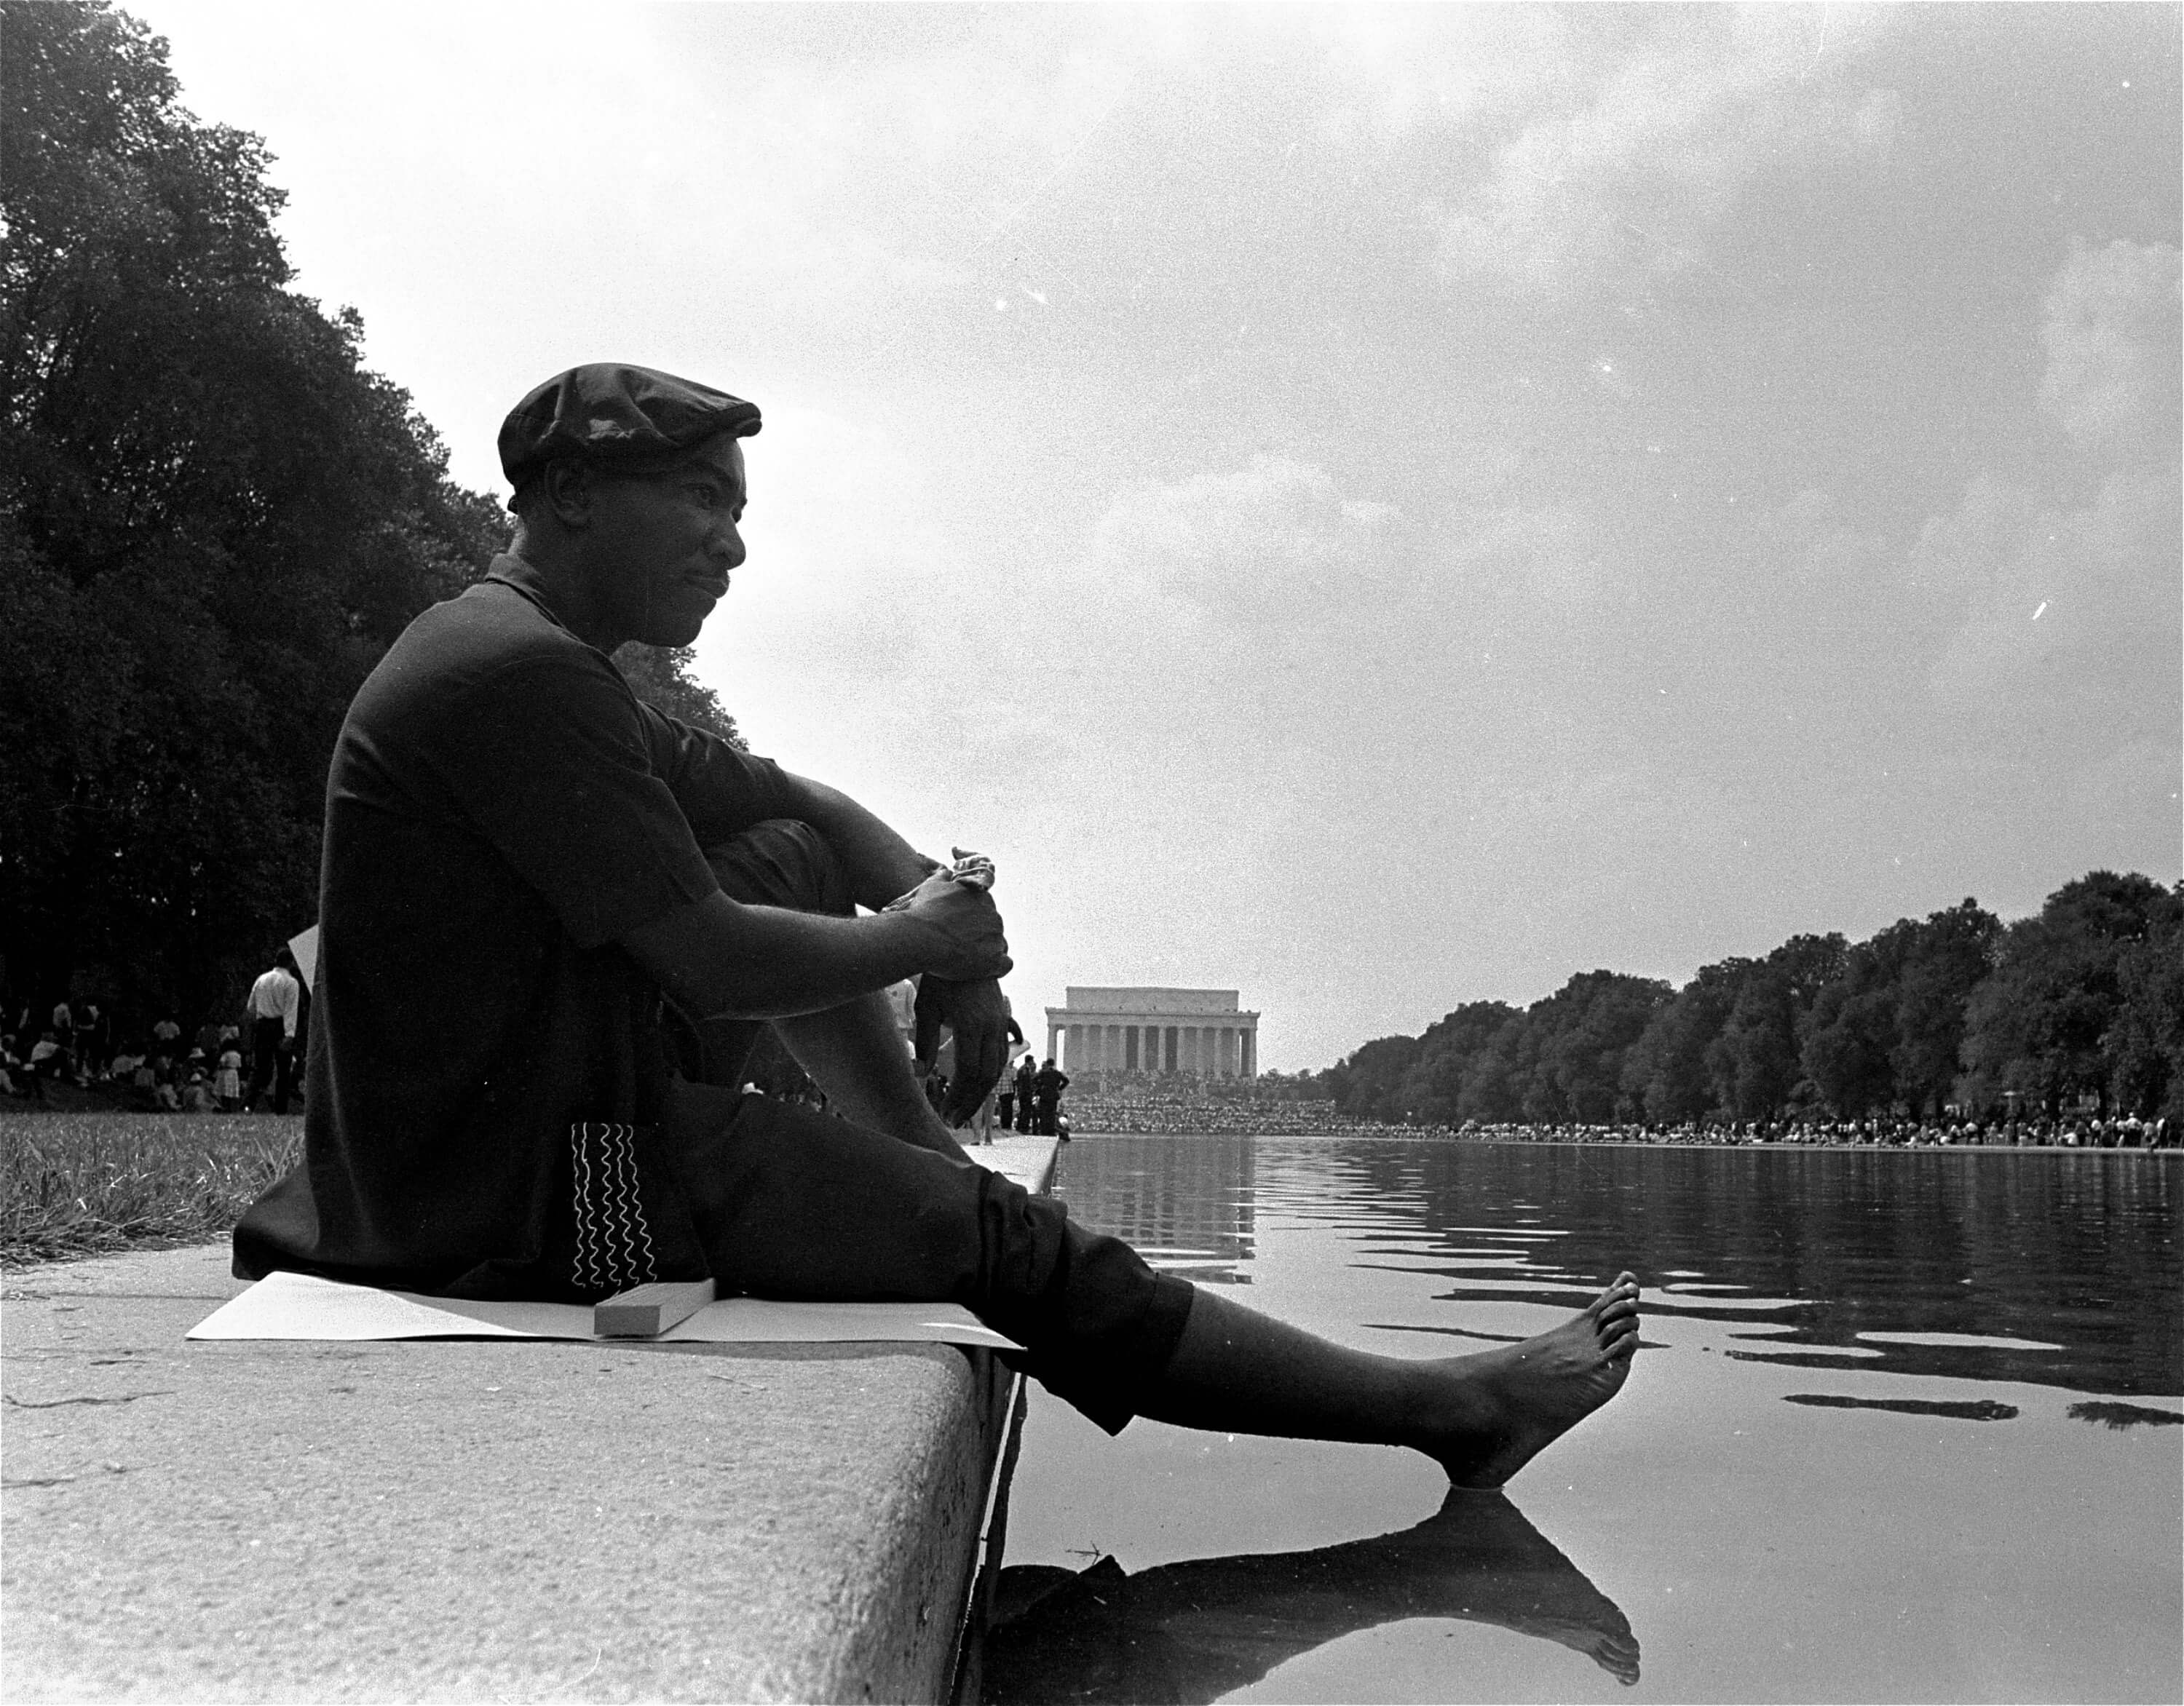 A civil rights marcher cools off his bare foot on the surface of the reflecting pool near the Lincoln Memorial following the March on Washington for Jobs and Freedom, August 28, 1963. (AP Photo)